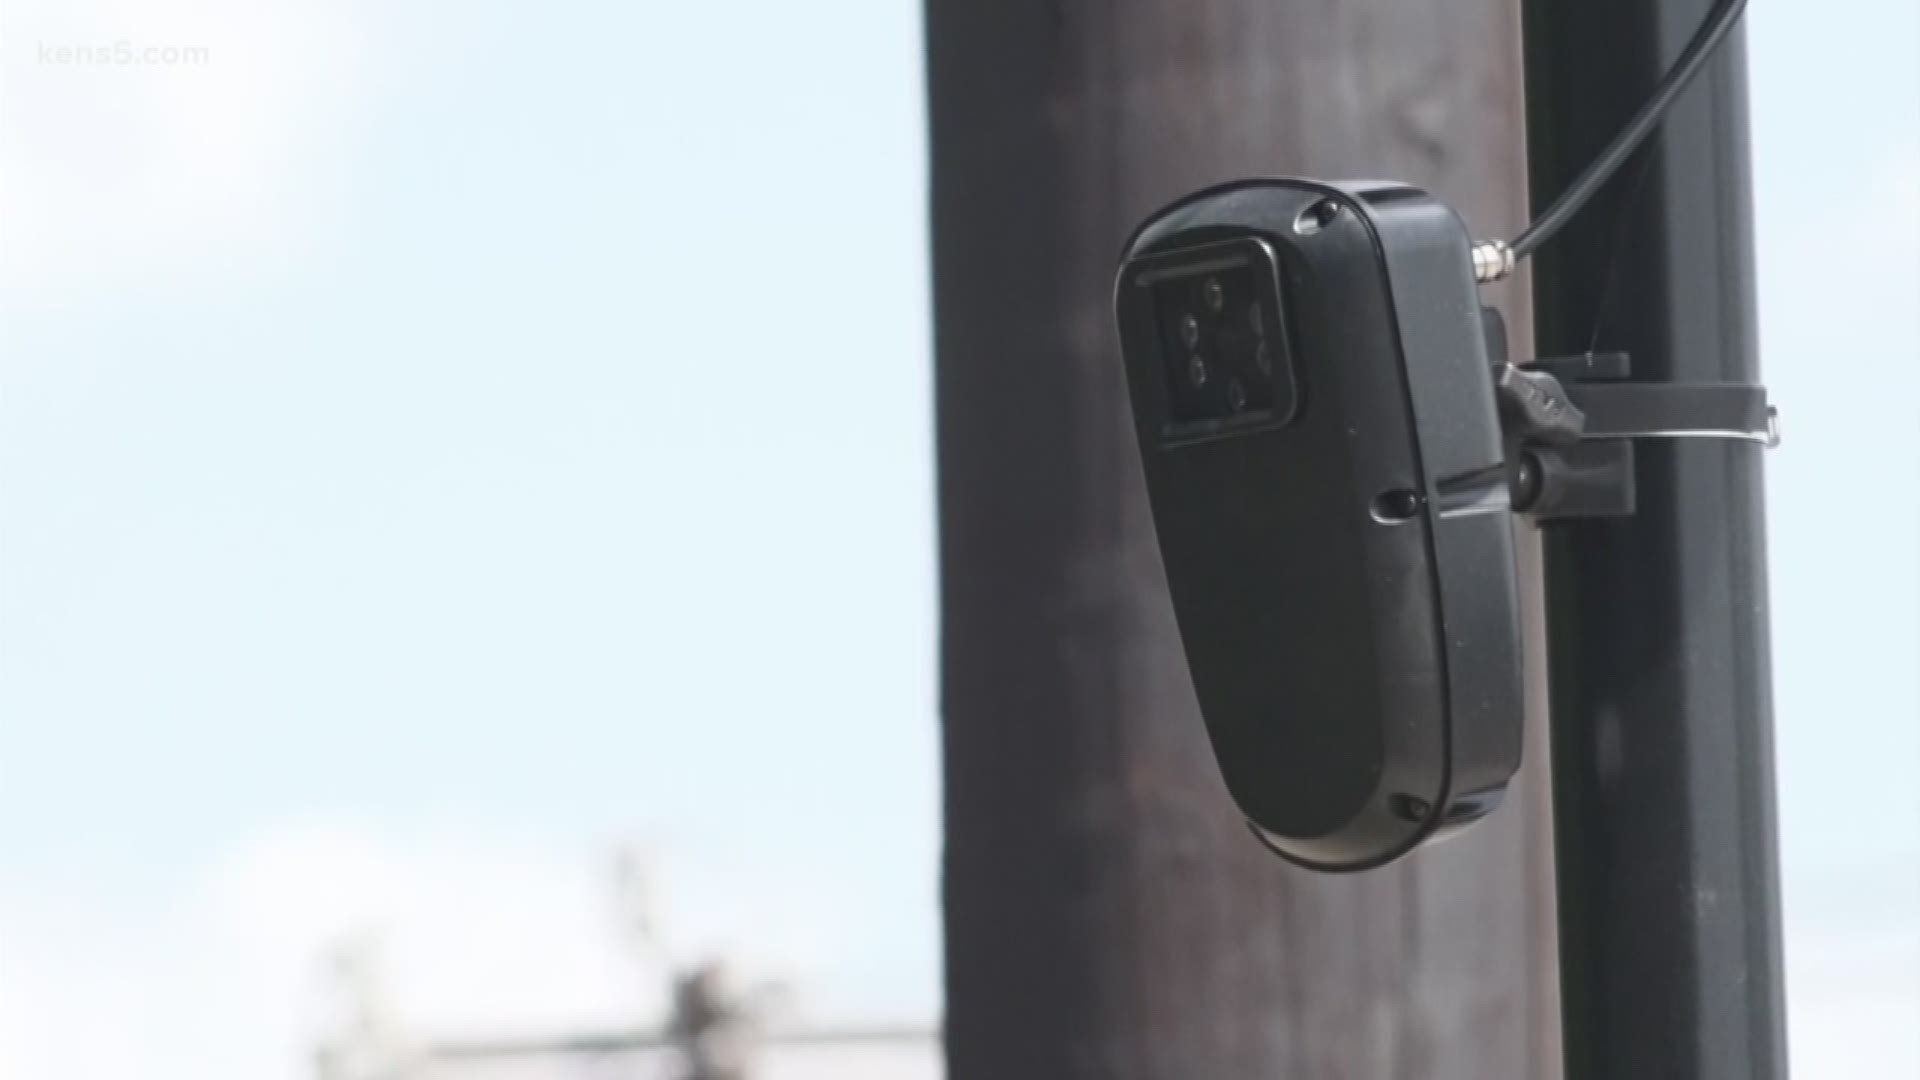 Some San Antonio neighborhoods are installing license plate cameras to catch crooks. But the cameras are raising concerns when it comes to privacy.